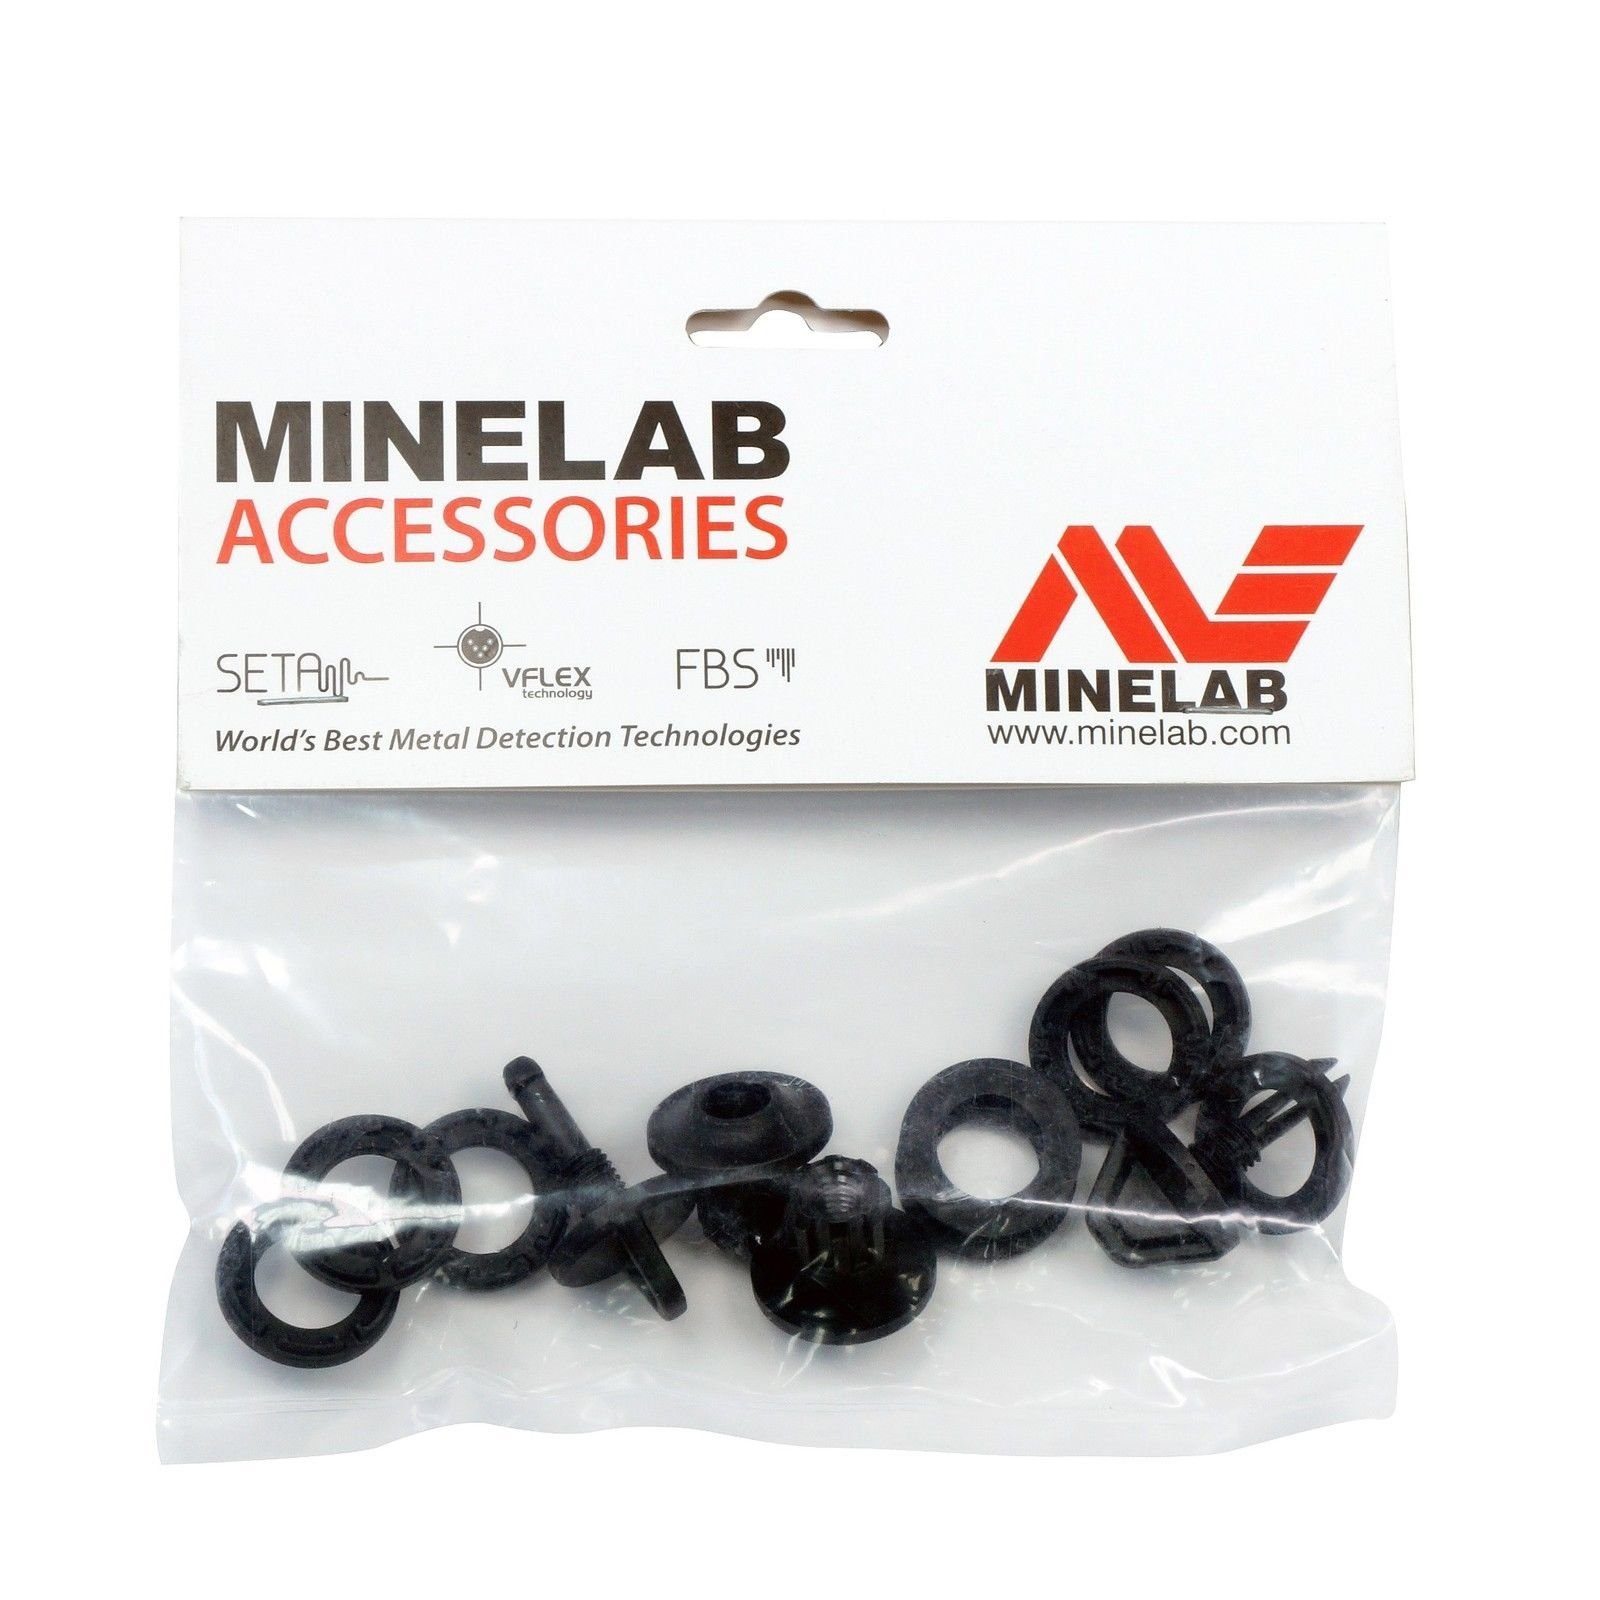 Minelab Search Coil Hardware Kit for GPZ 7000 Metal Detector